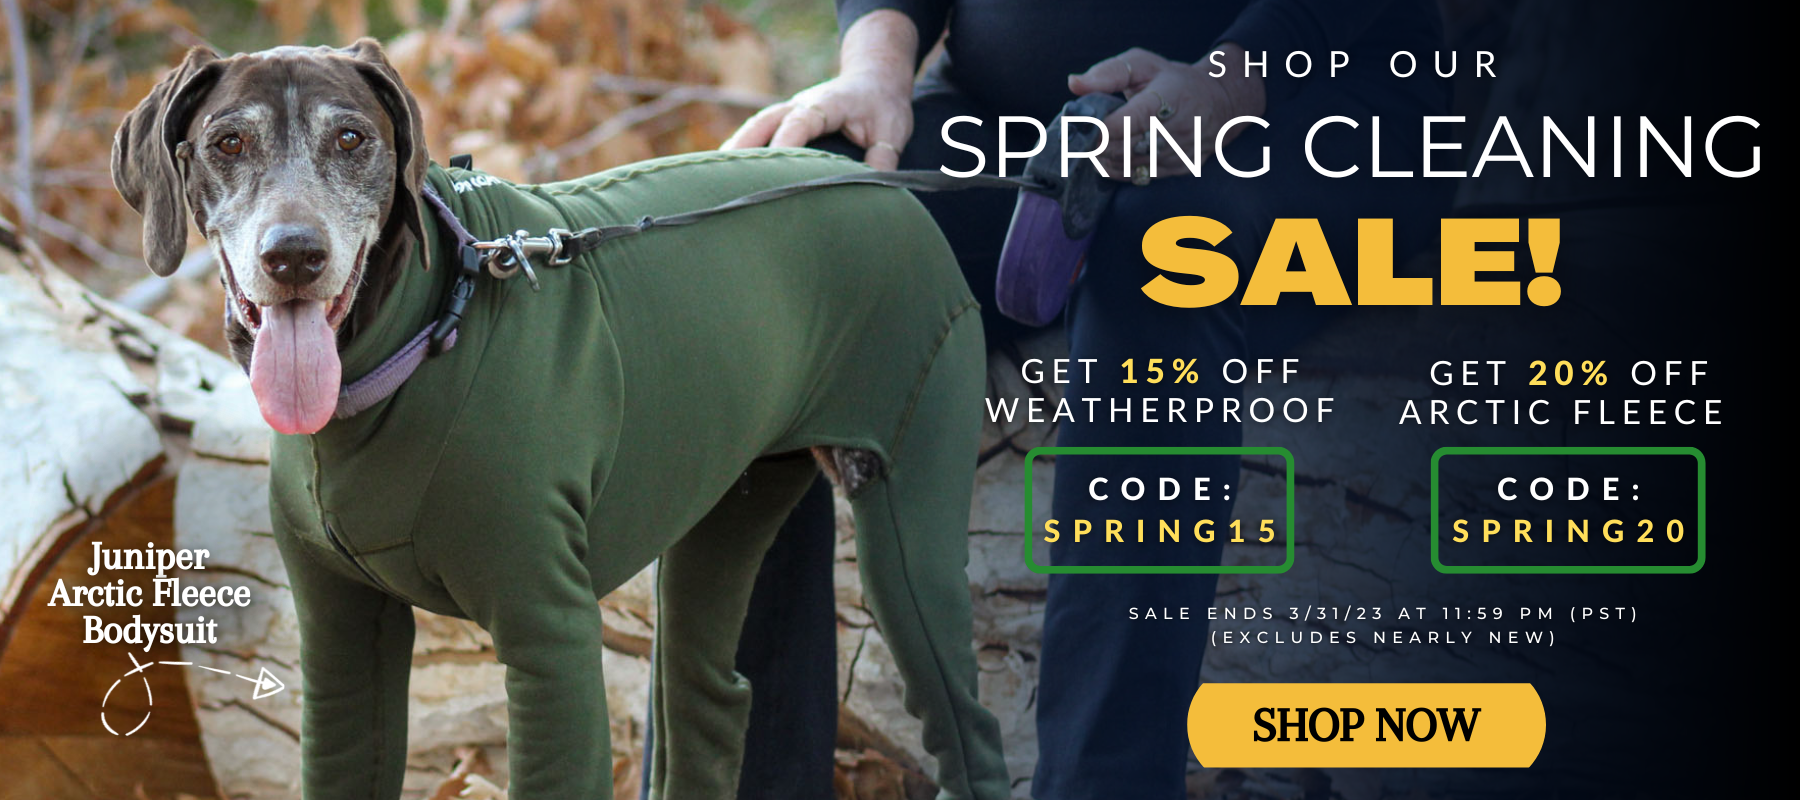 K9 Spring Cleaning Sale